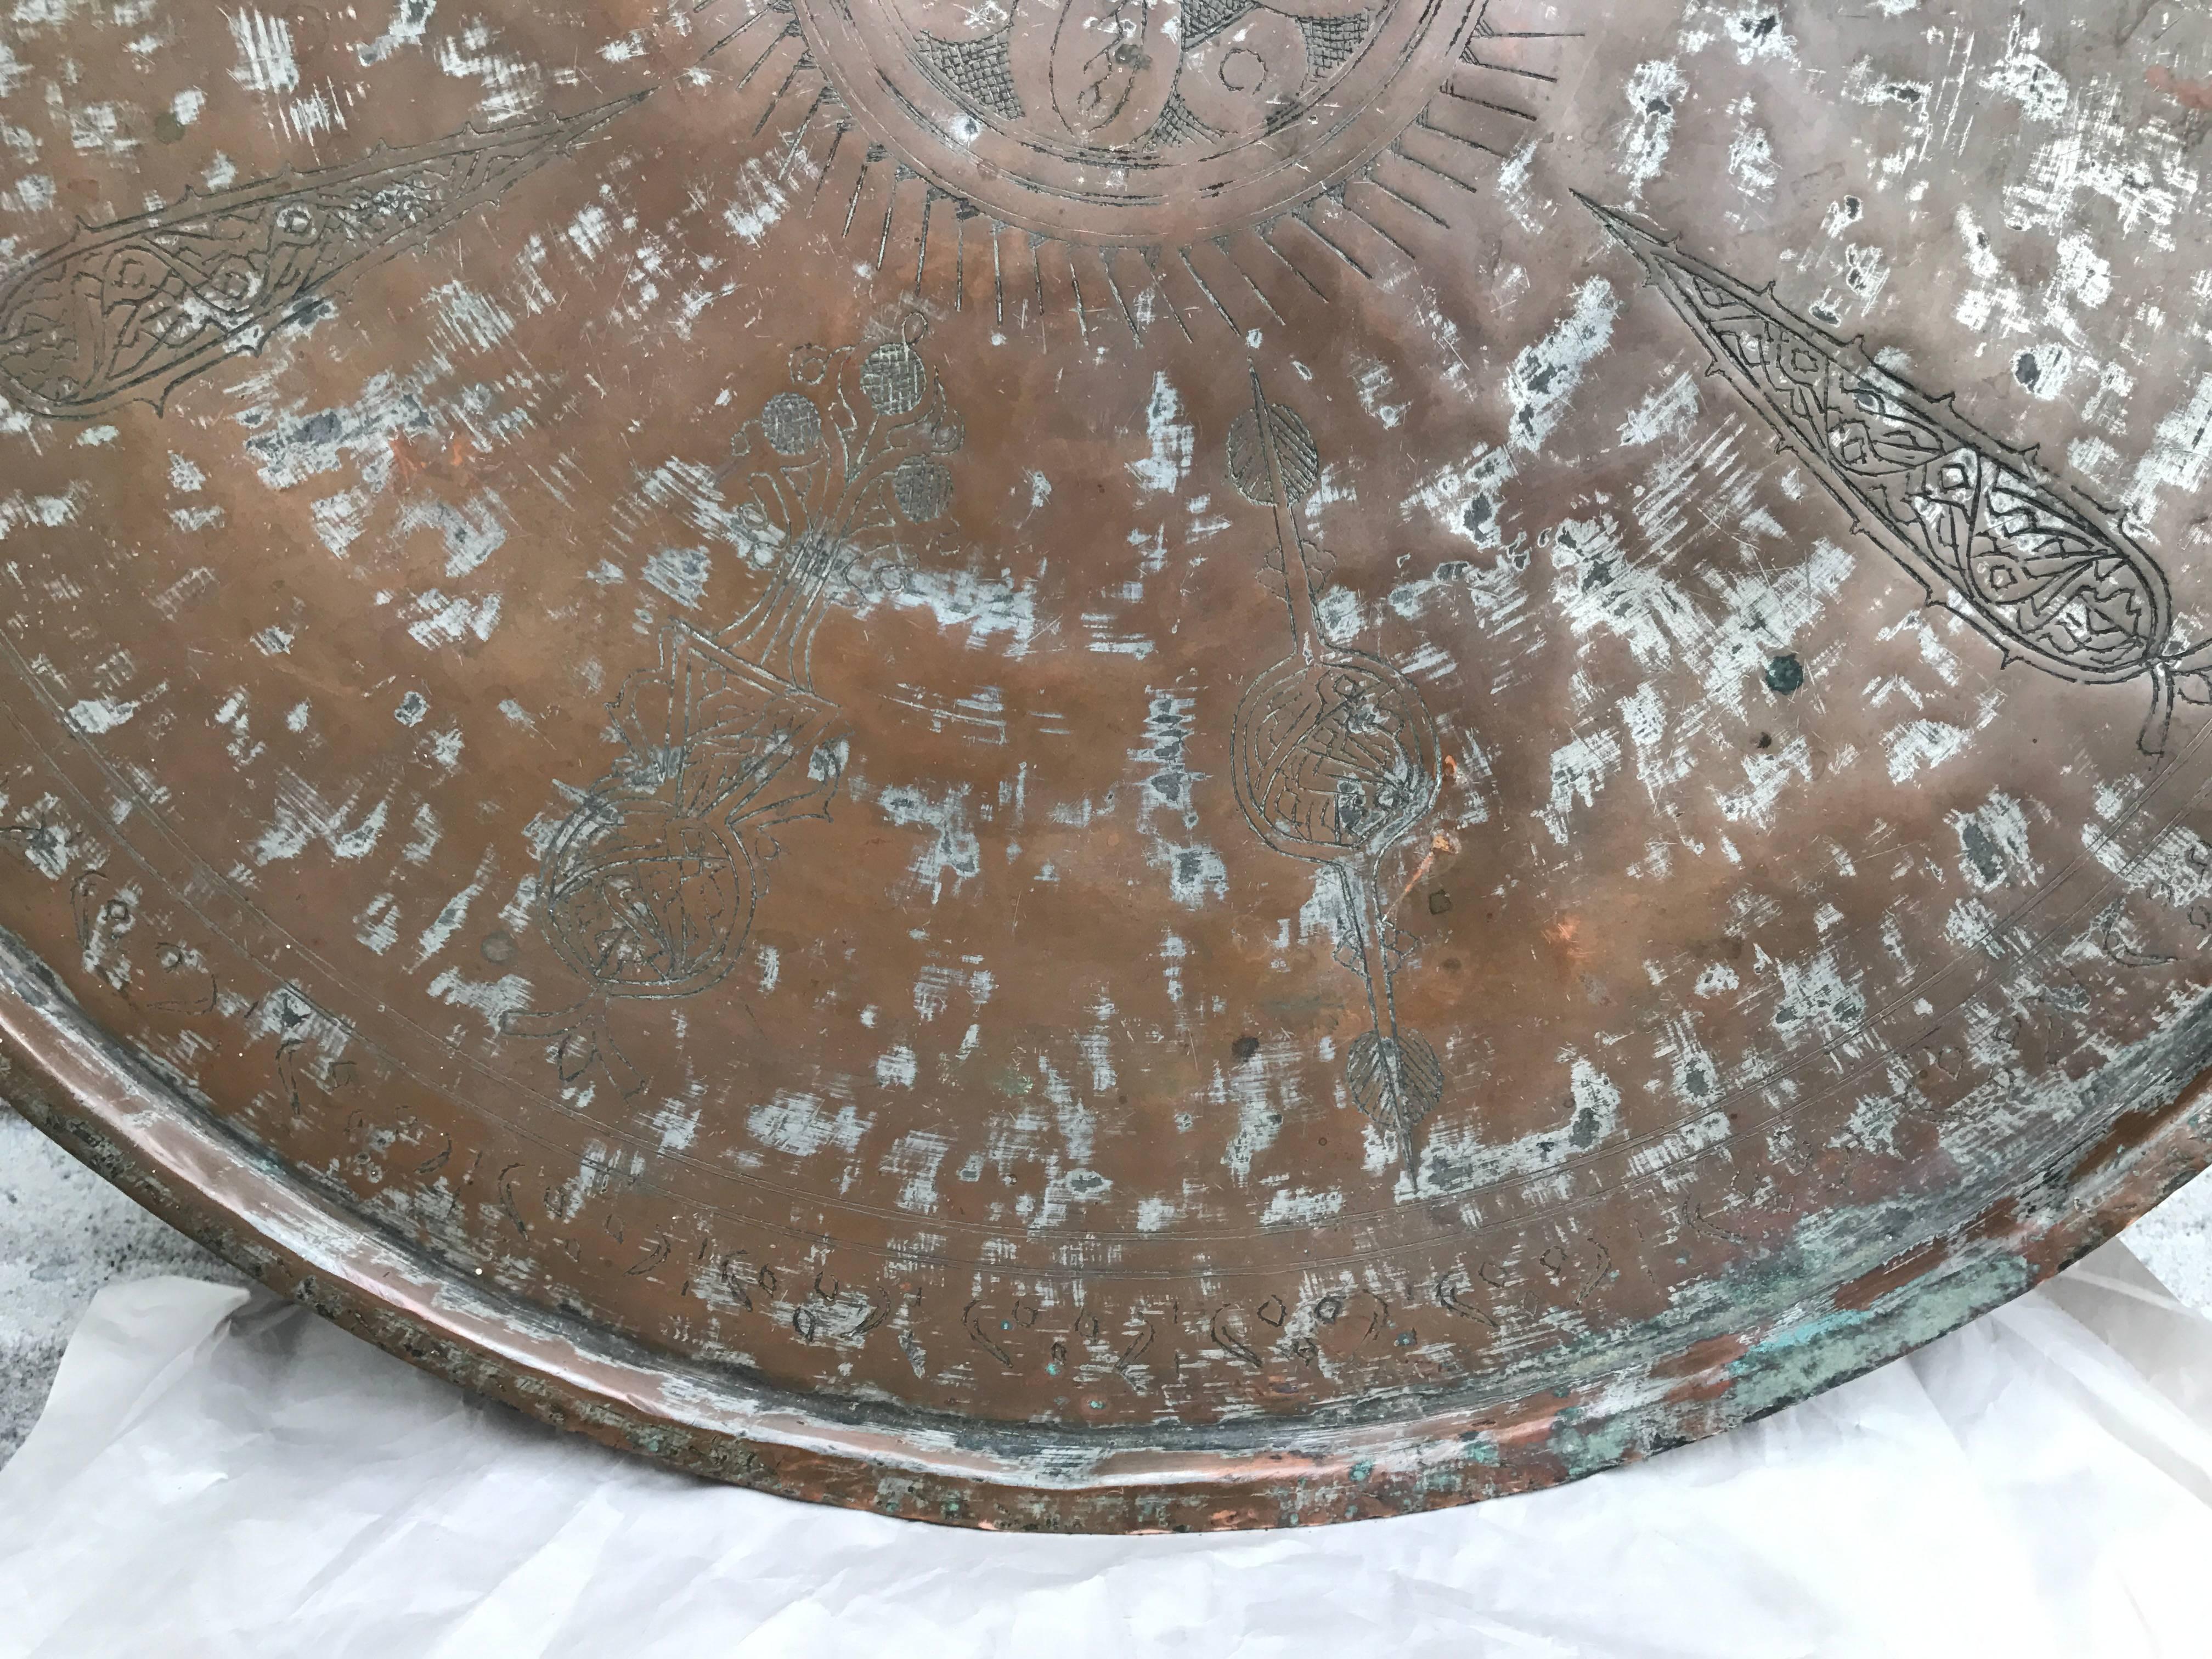 Large-scale antique Moroccan copper charger or tray with traces of silvering. Incised with Moorish inspired decorations. This one has some real age, possibly 18th century. Great surface patina.